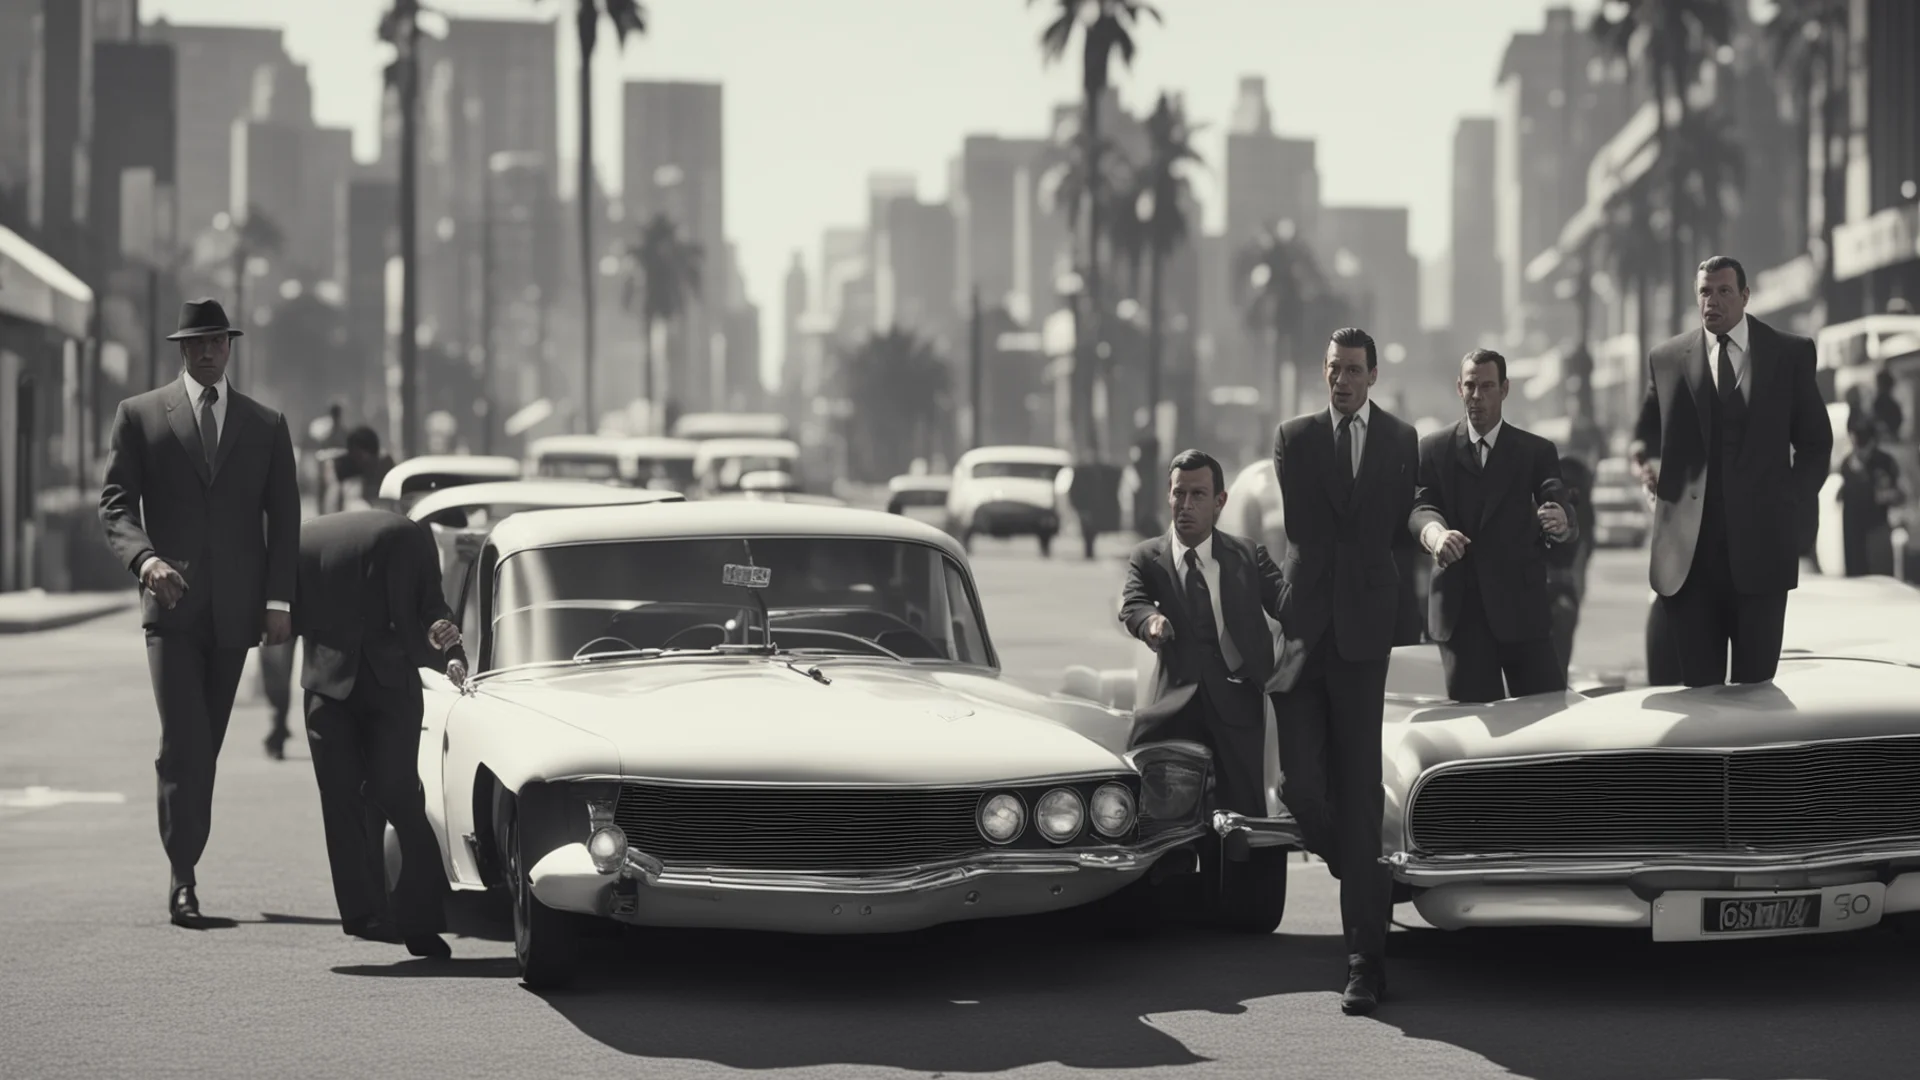 aigangster movie scene out of the 60ies in the style of gta 5 amazing awesome portrait 2 wide